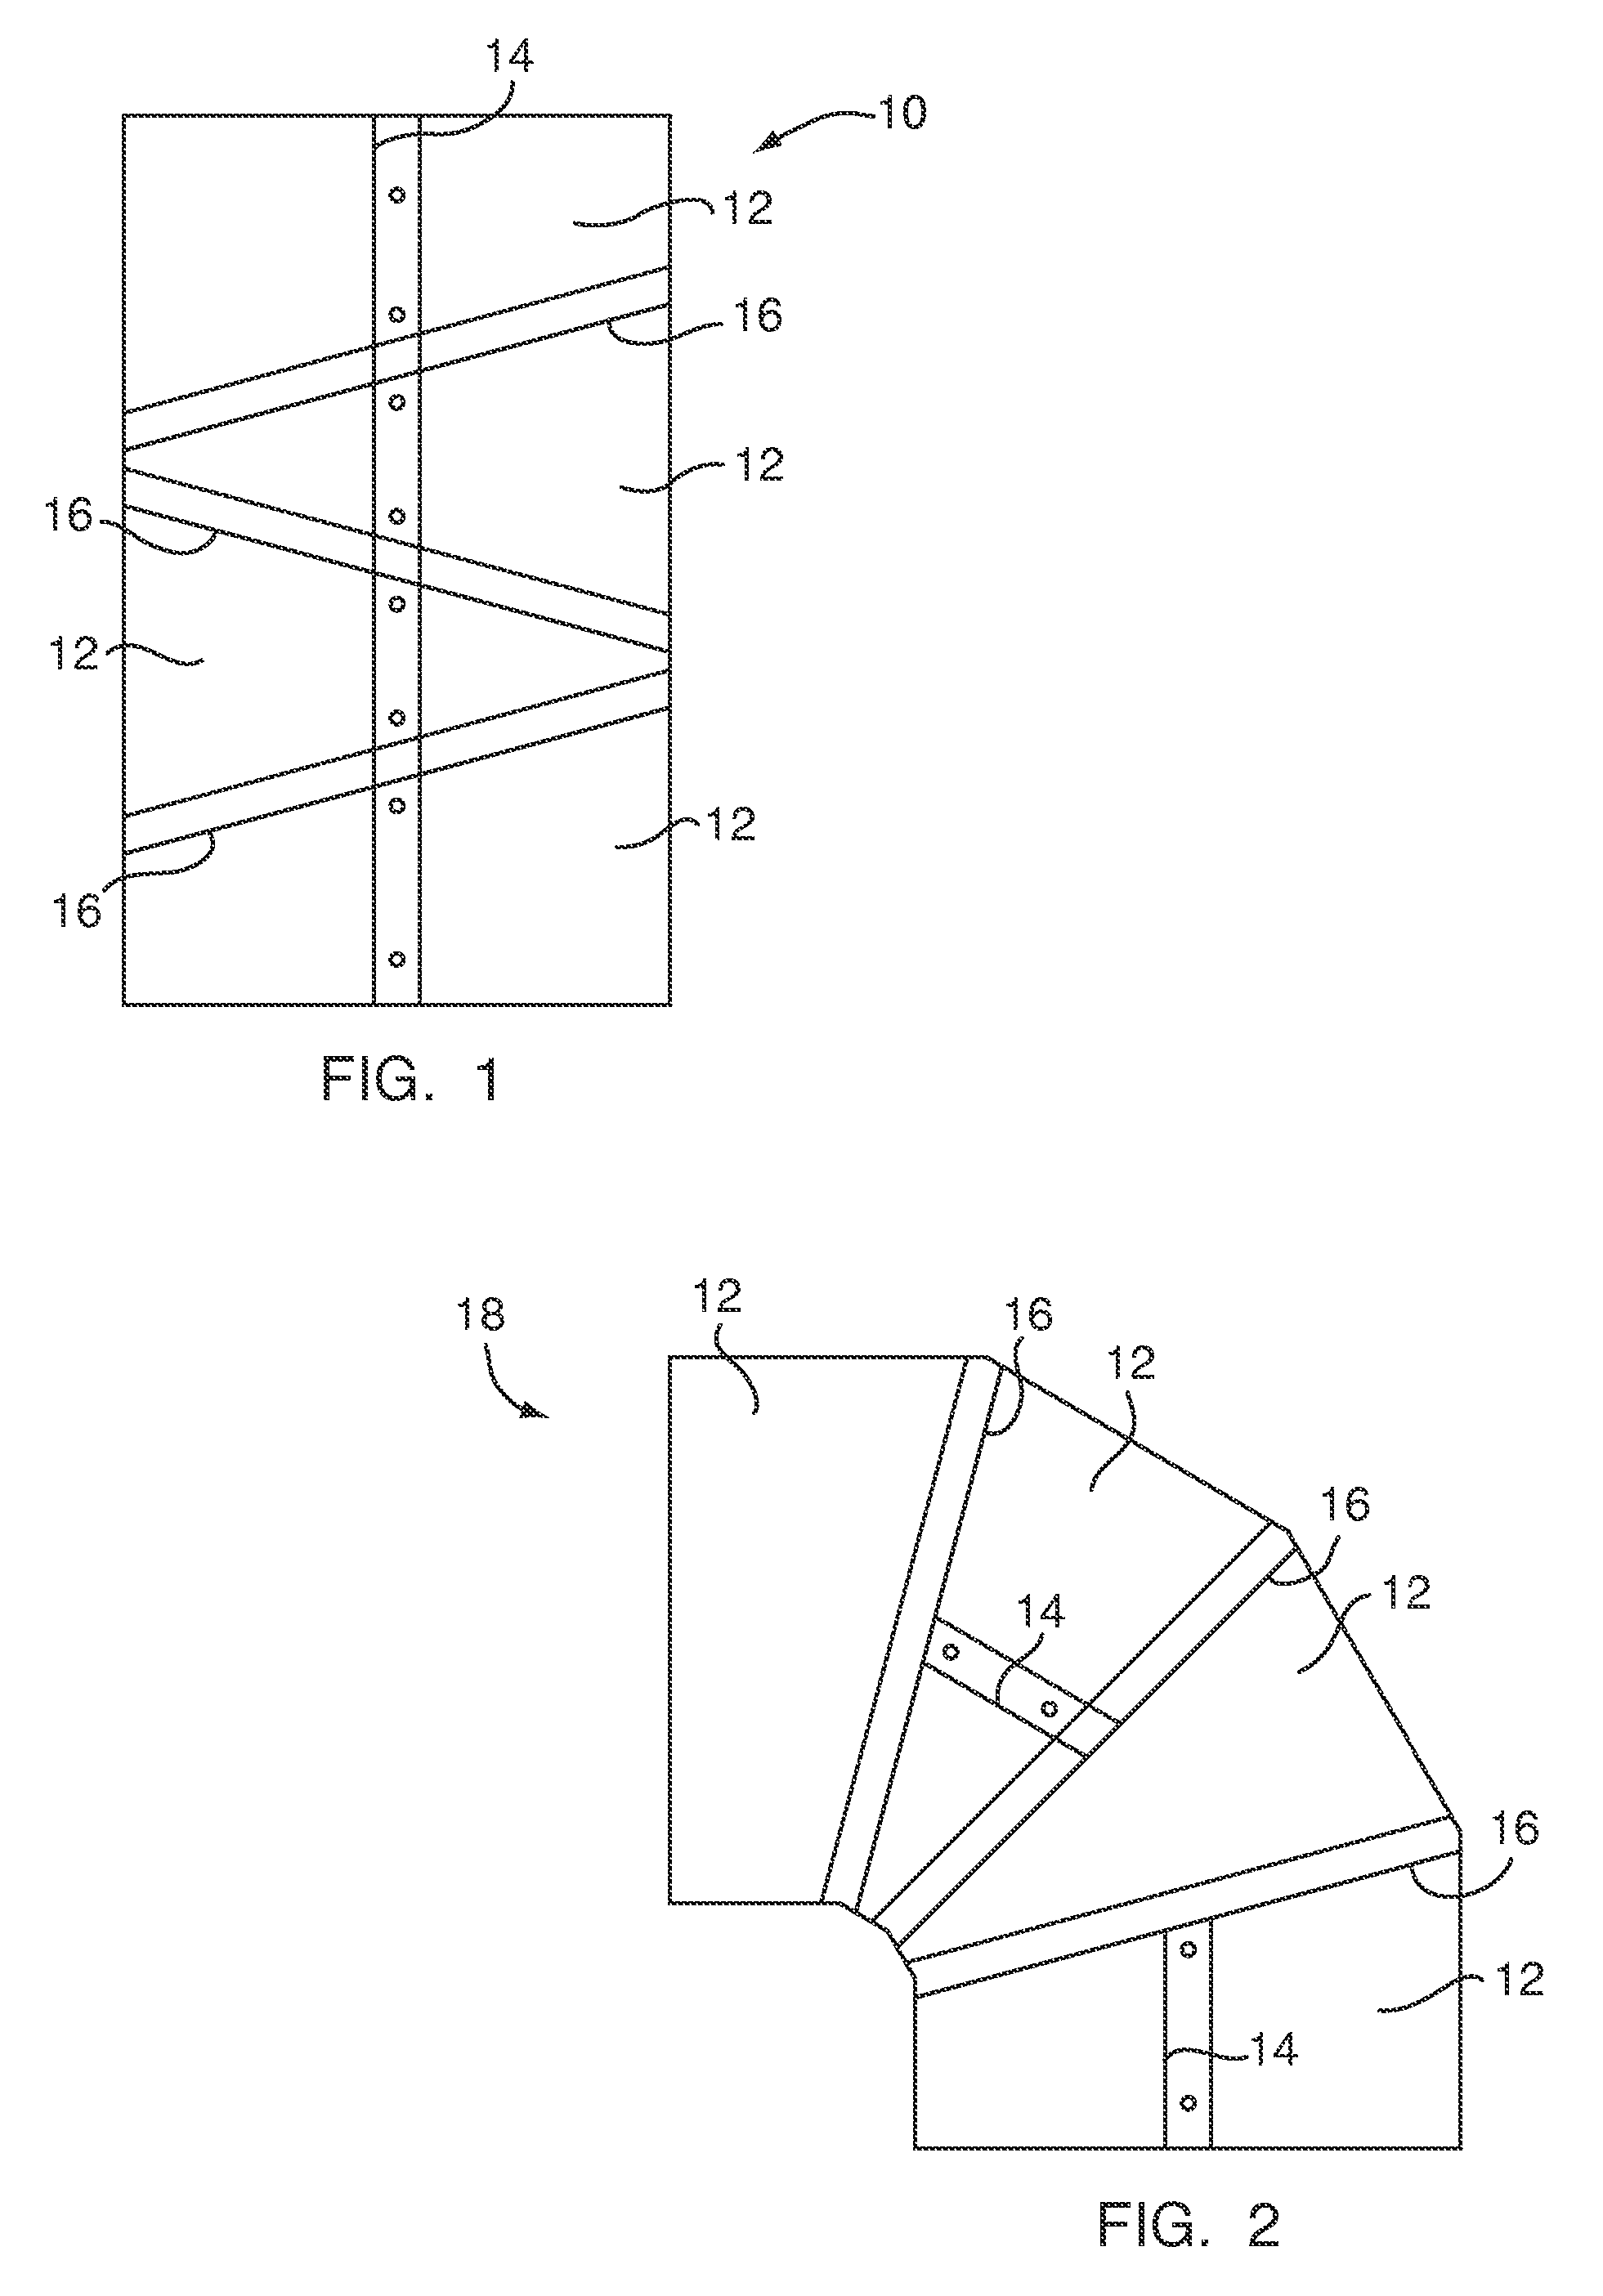 Formation and rotational apparatus for cylindrical workpieces